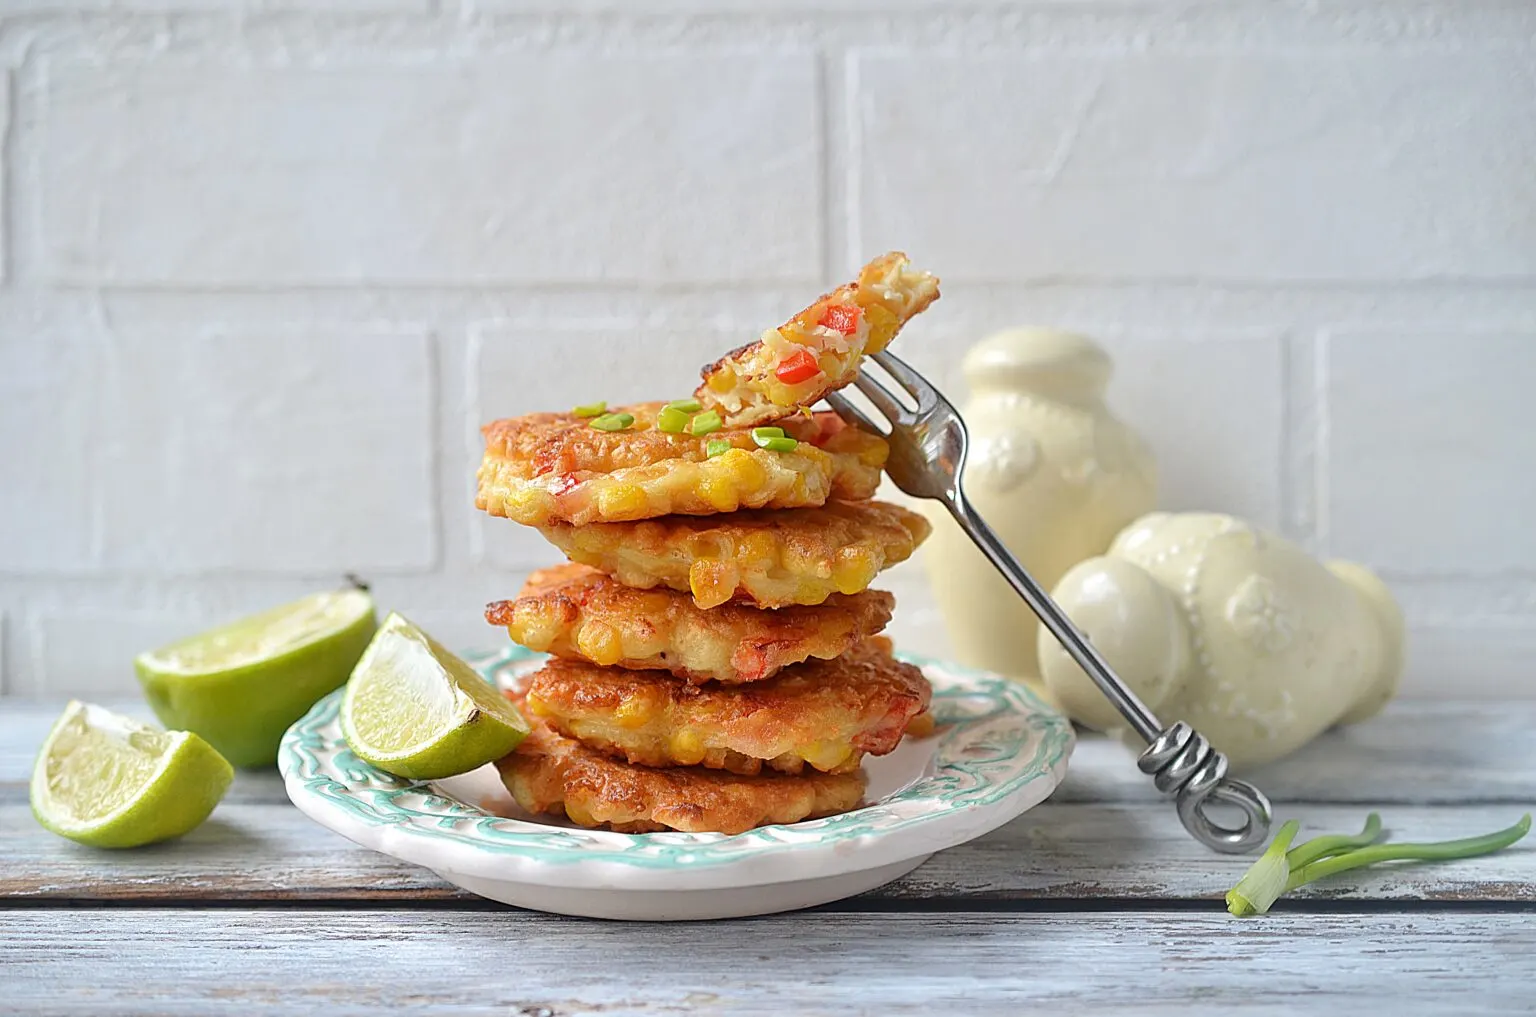 Stack of Mexican corn cakes on a white plate with a fork.